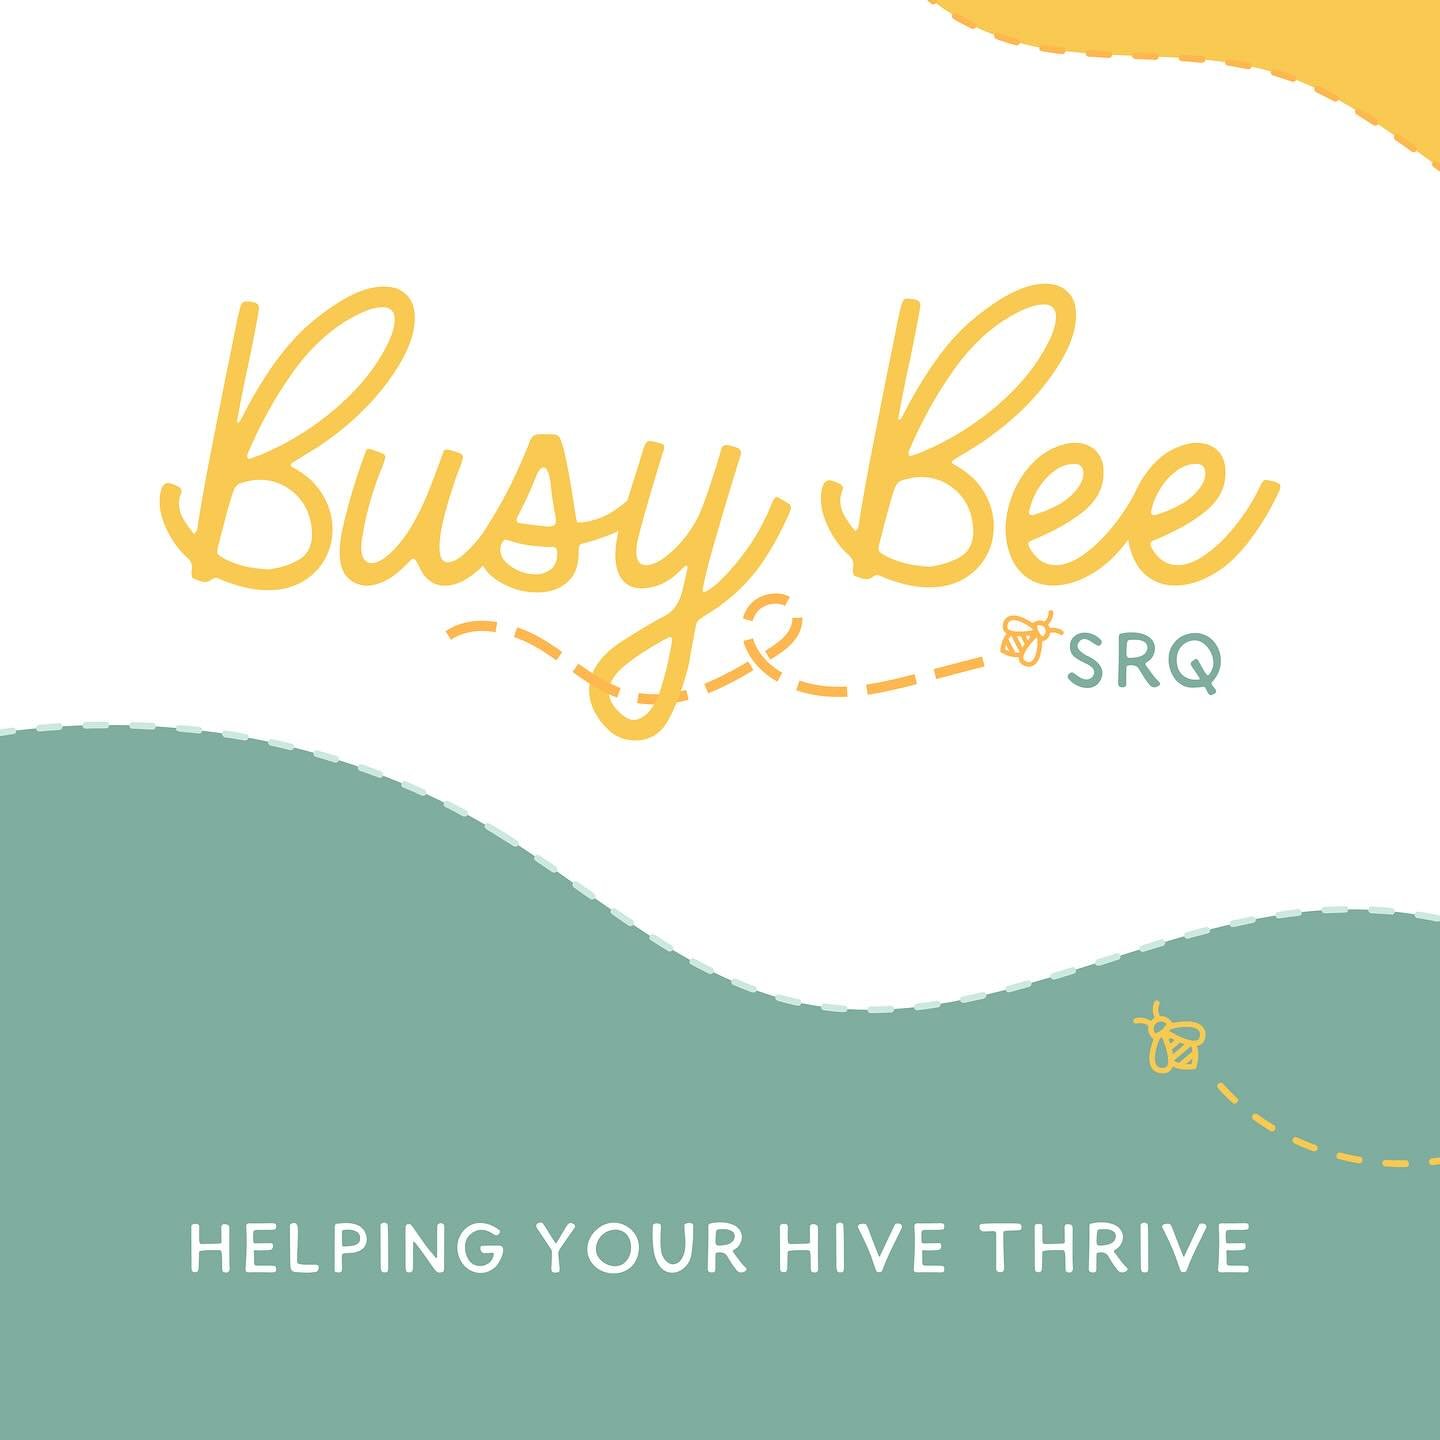 New Brand + Website 🤩

busy bee SRQ is a life assistance business that will leave your mind, soul and home feeling light and airy after they buzz through helping you organize, tidy up, run errands or even help with pick up + drop off of your kiddos.